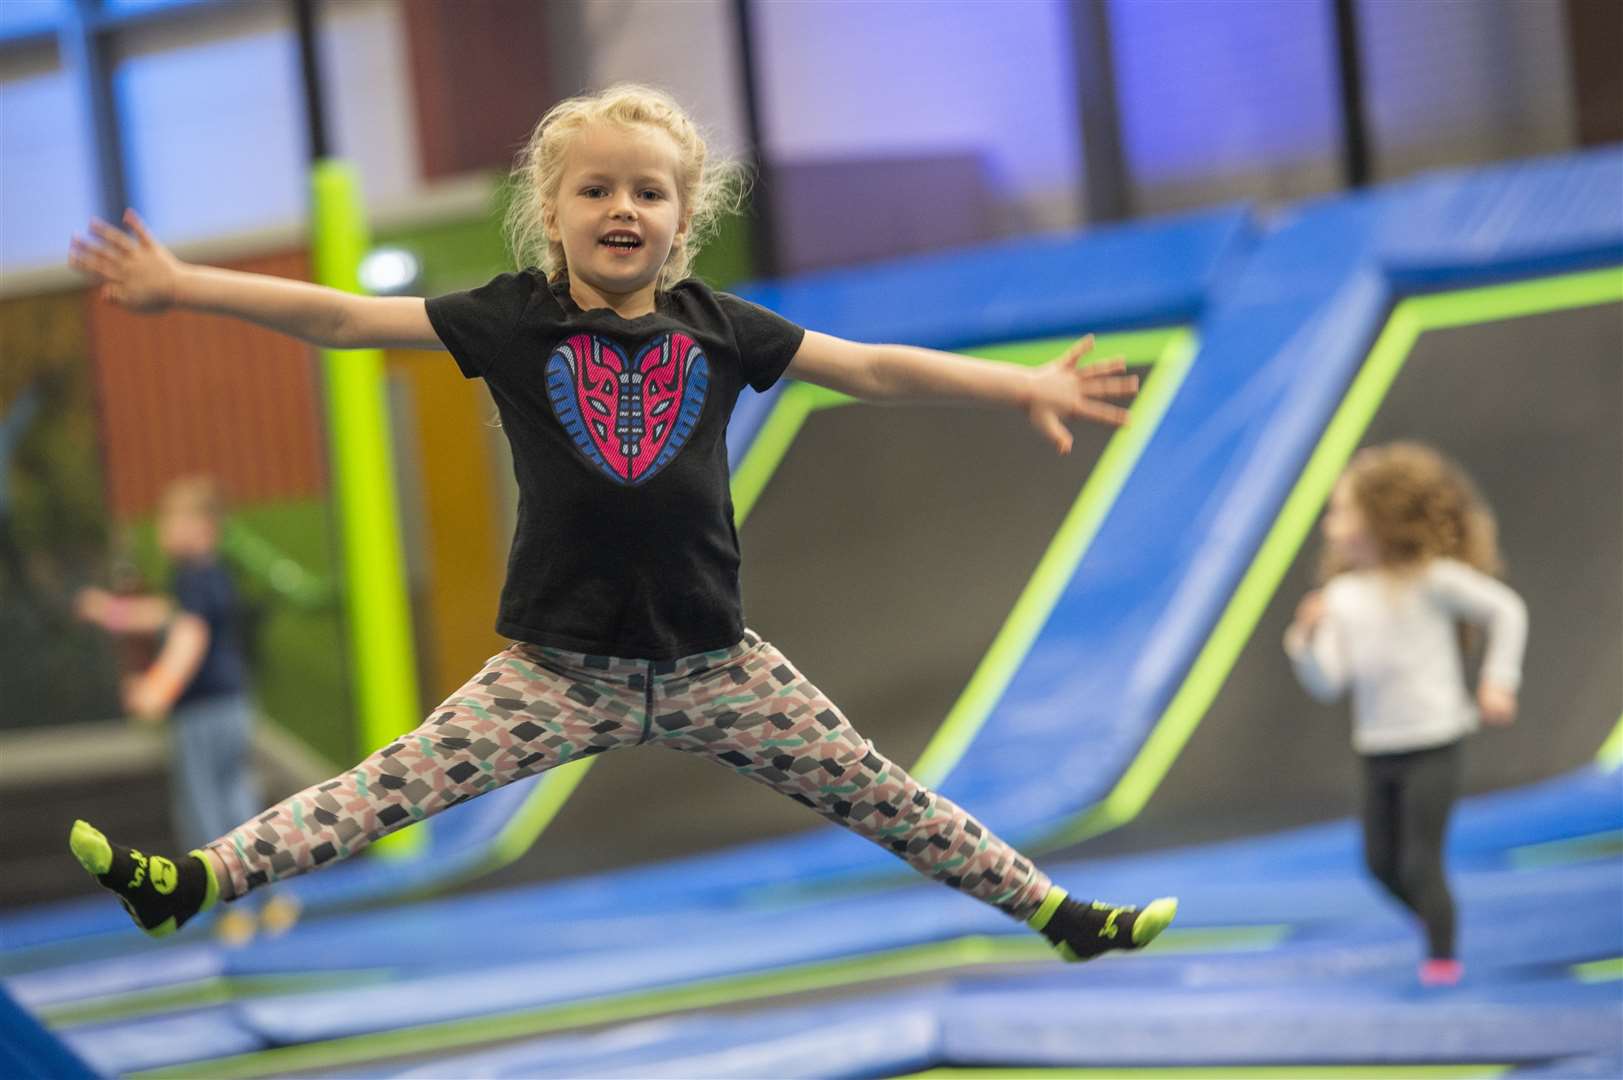 The government has said trampoline parks can reopen